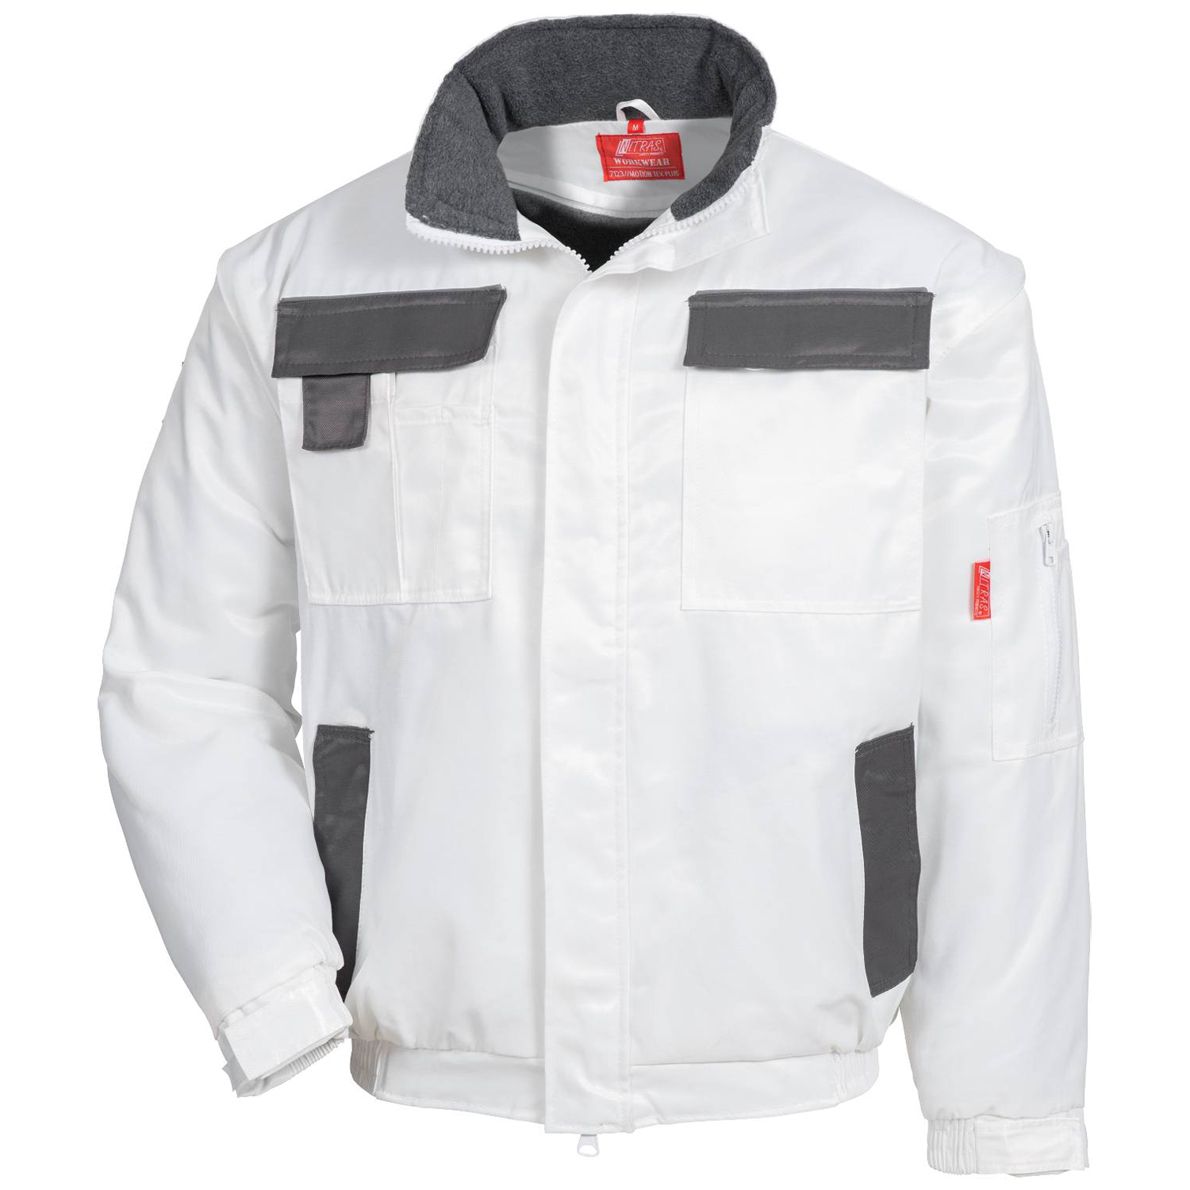 NITRAS MOTION TEX PLUS work jacket - wind & water repellent outdoor pilot jacket - warmly lined